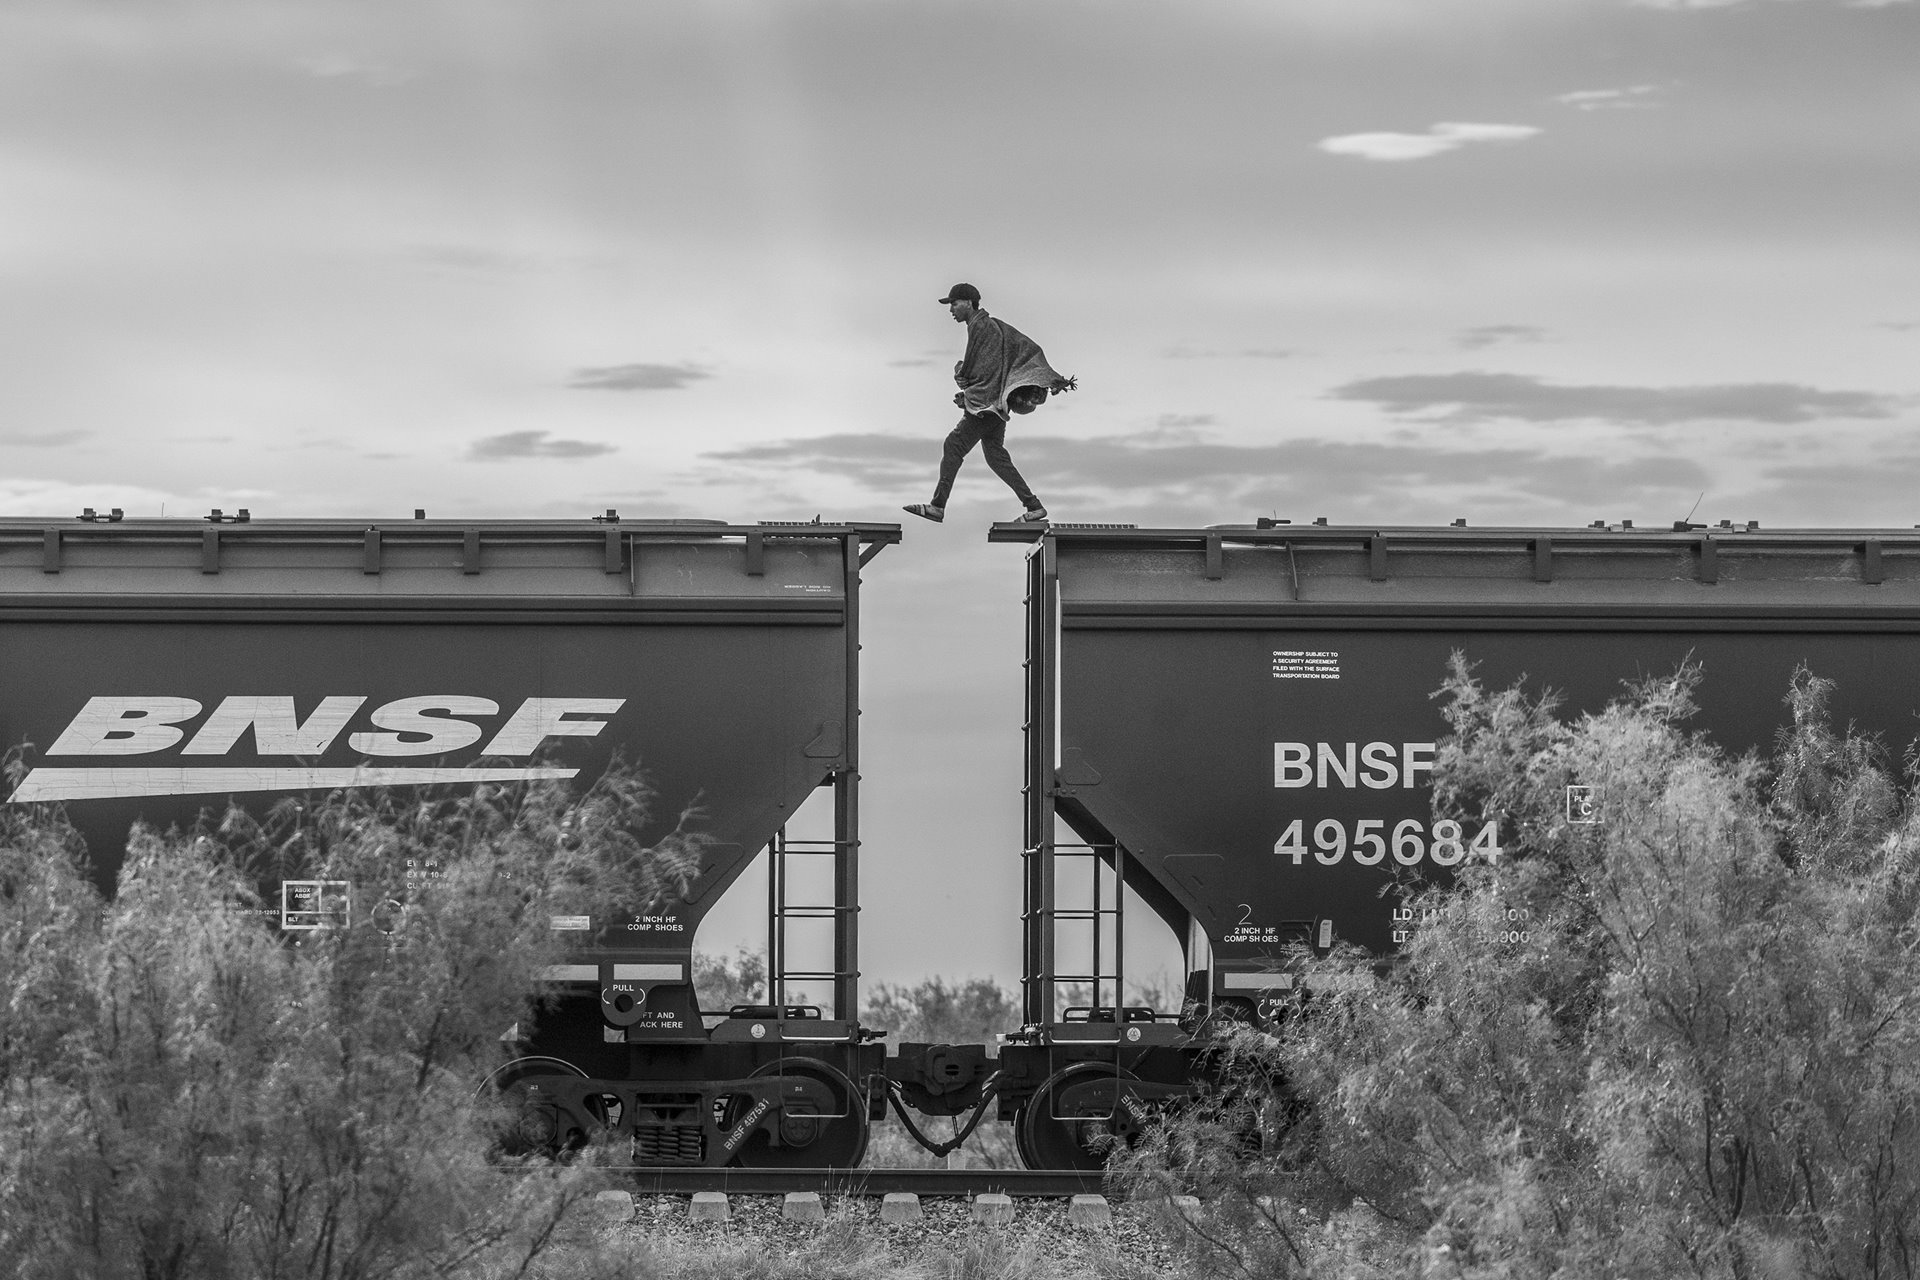 A migrant walks atop a freight train known as &ldquo;The Beast&rdquo; in Piedras Negras, Mexico. Migrants and asylum seekers lacking the financial resources to pay a smuggler often resort to using cargo trains to reach the United States border. This mode of transportation is very dangerous; over the years, hundreds have fallen onto the tracks and have been killed or mutilated. Thousands more have fallen victim to extortion, rape, kidnapping, or robbery orchestrated by drug cartels or corrupt authorities in various stops along the train&rsquo;s northward route.&nbsp;